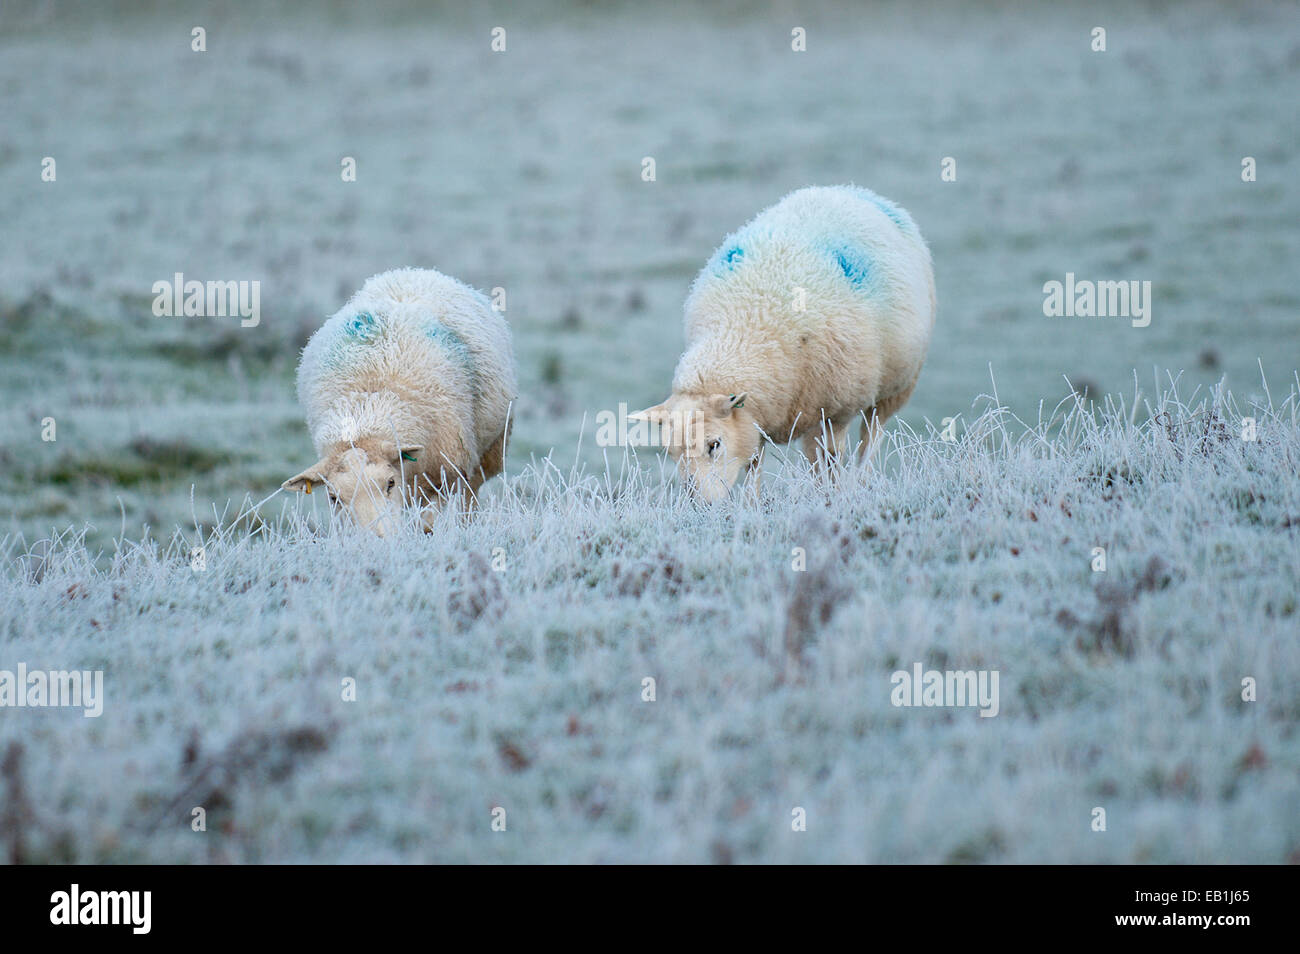 Powys, Wales, UK. 24th November 2014. After a cold night with temperatures dropping below zero the morning breaks to frost and mist in the valleys. Credit:  Graham M. Lawrence/Alamy Live News Stock Photo